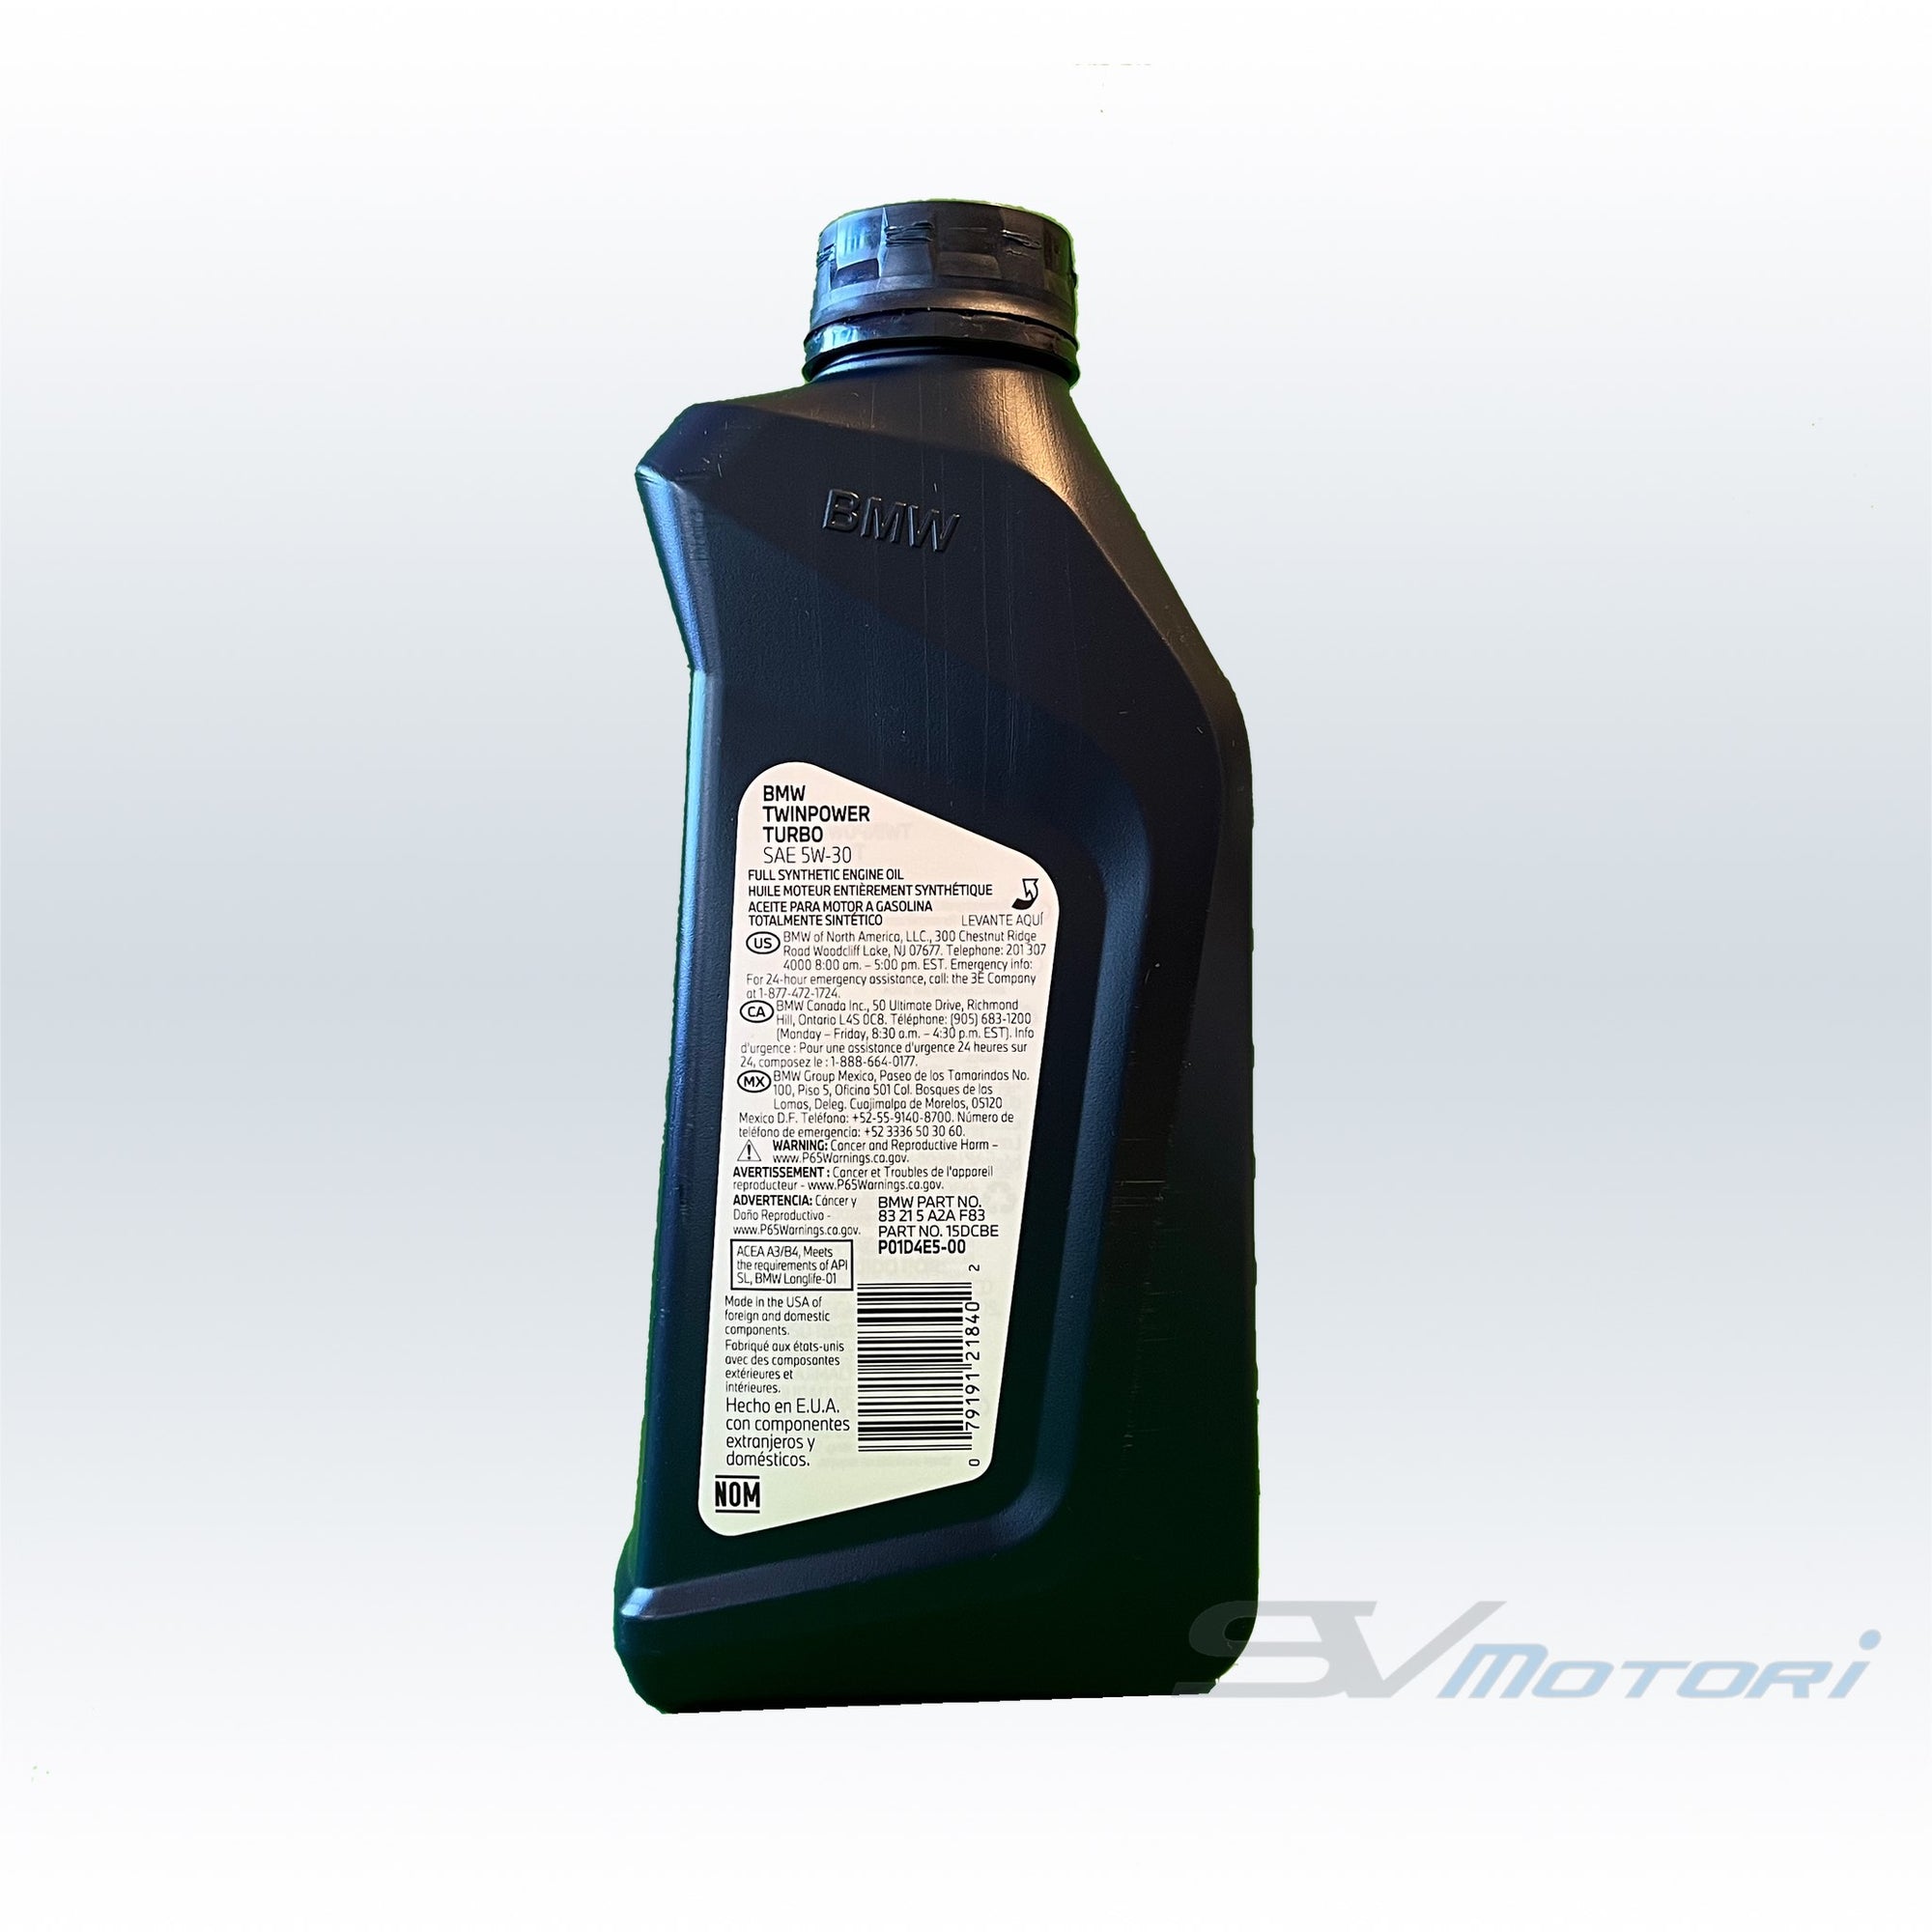 Genuine 83212466454 1 Qt. 5W30 Synthetic Oil for 2011 BMW 1 Series M